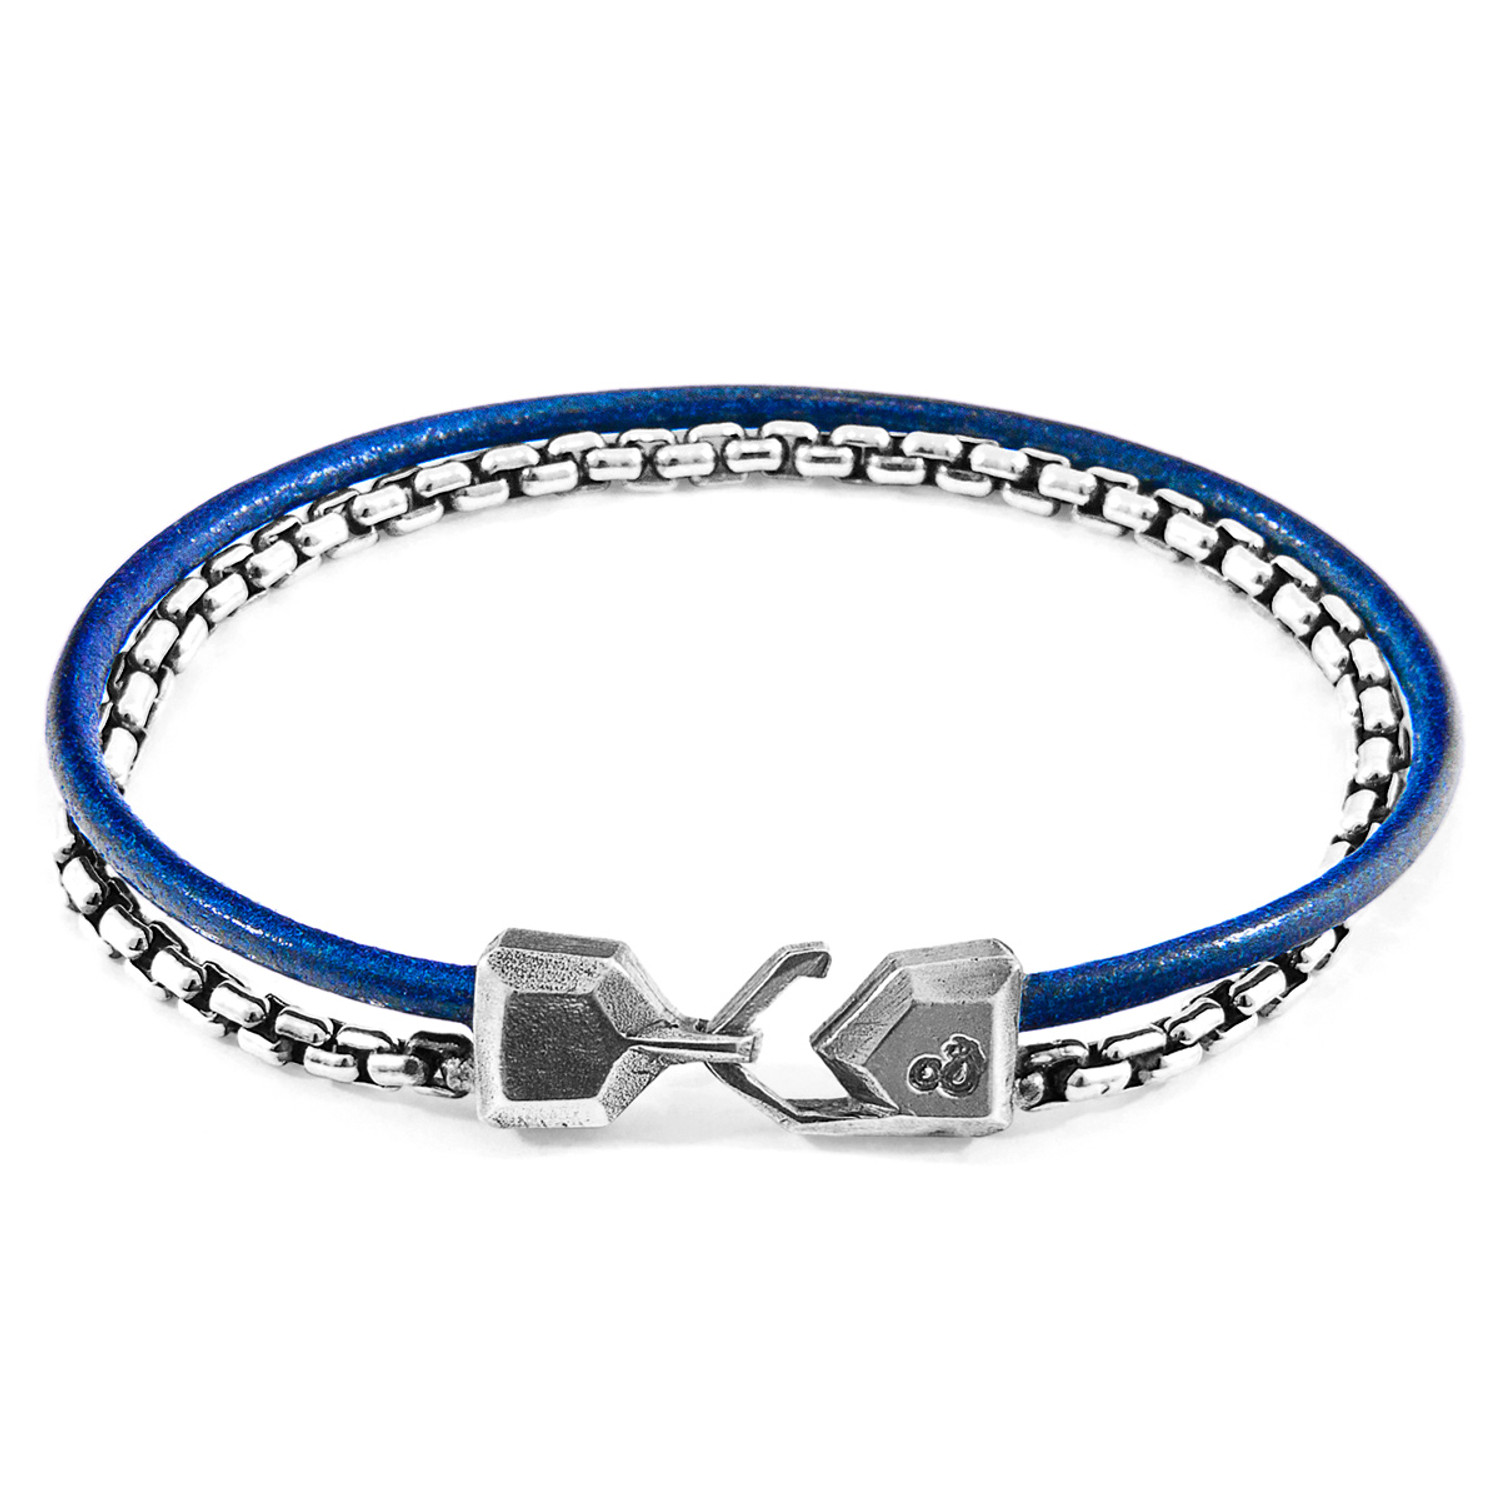 Anchor & Crew Azure Blue Moonraker Mast Silver and Round Leather Bracelet 